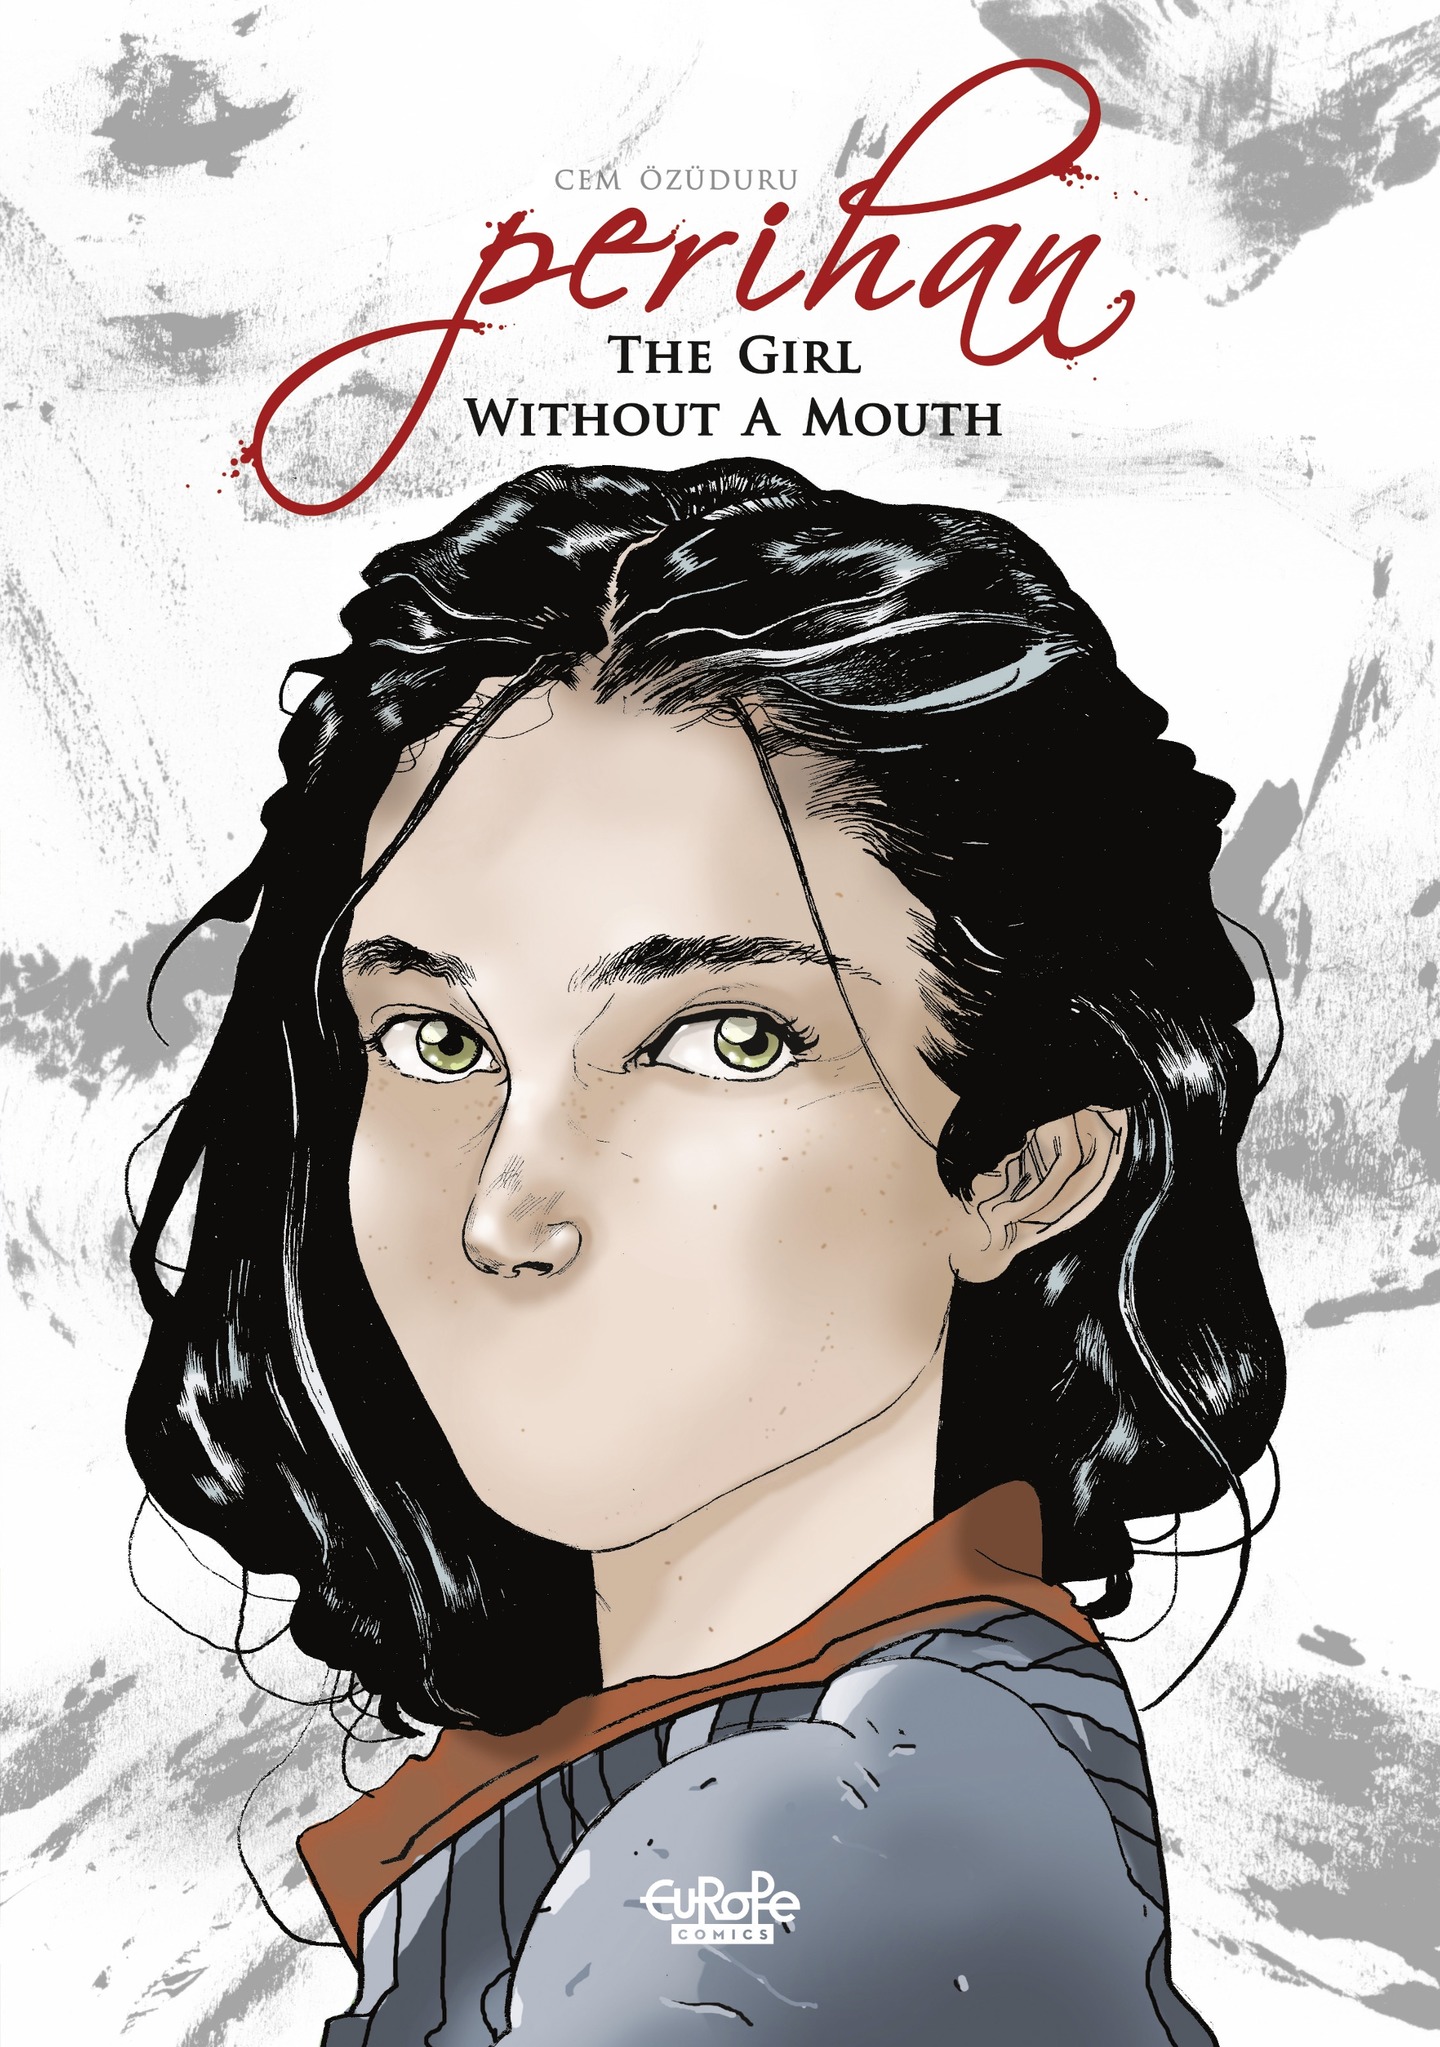 Read online Perihan The Girl Without A Mouth comic -  Issue # TPB - 1